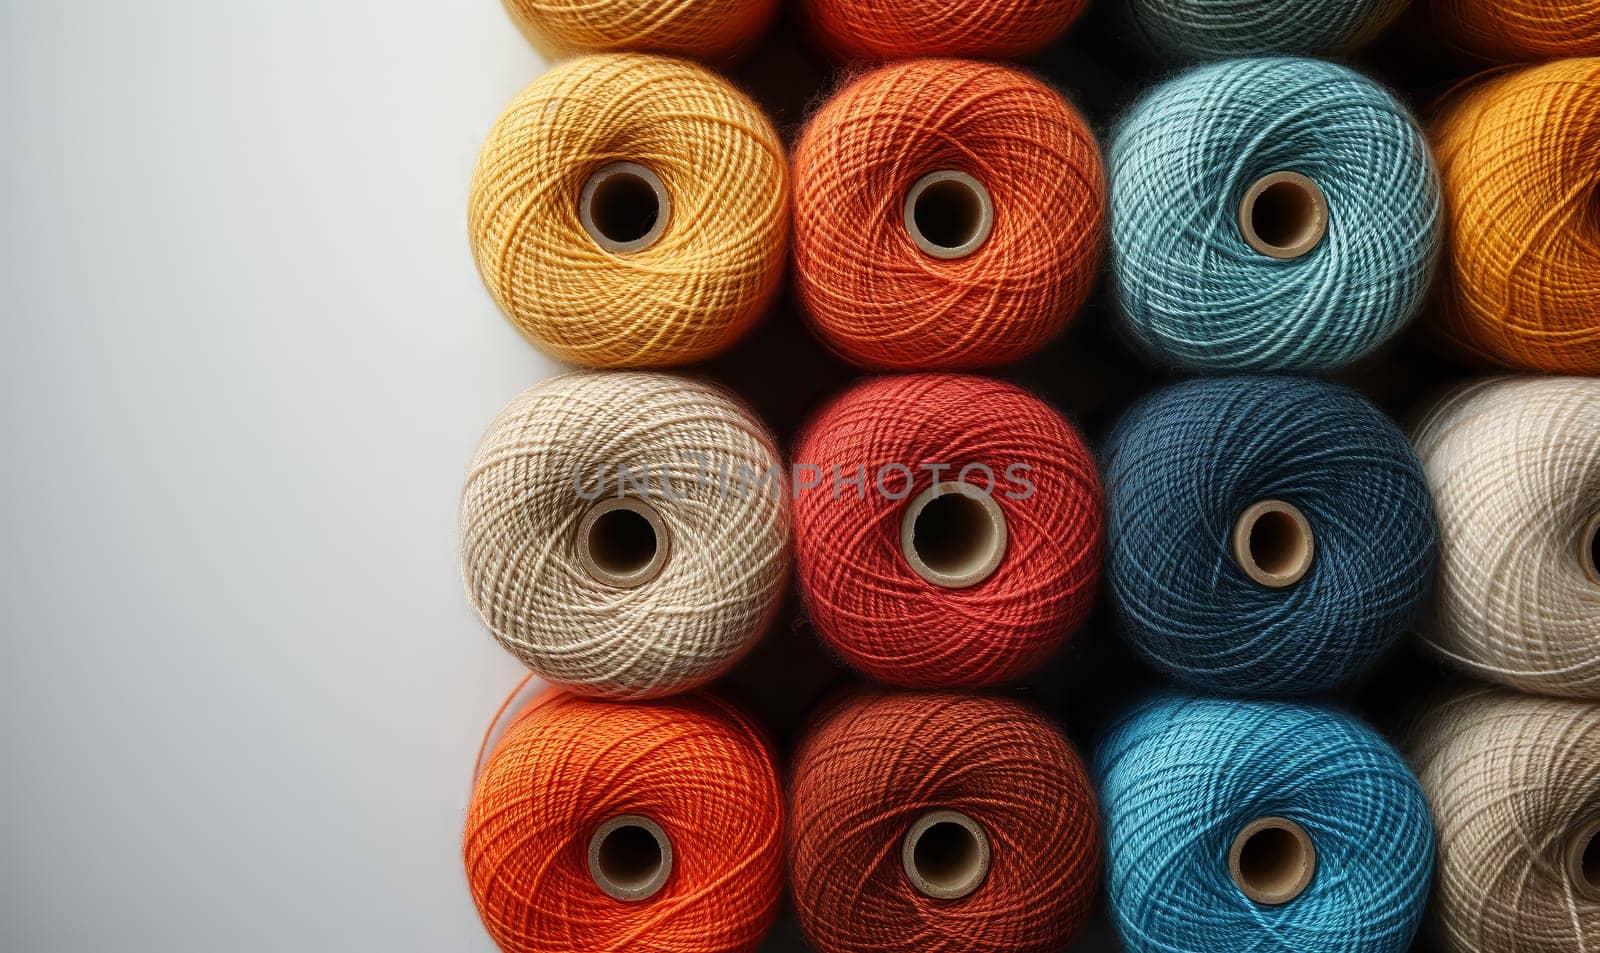 Spools of multi-colored threads on a white background. by Fischeron